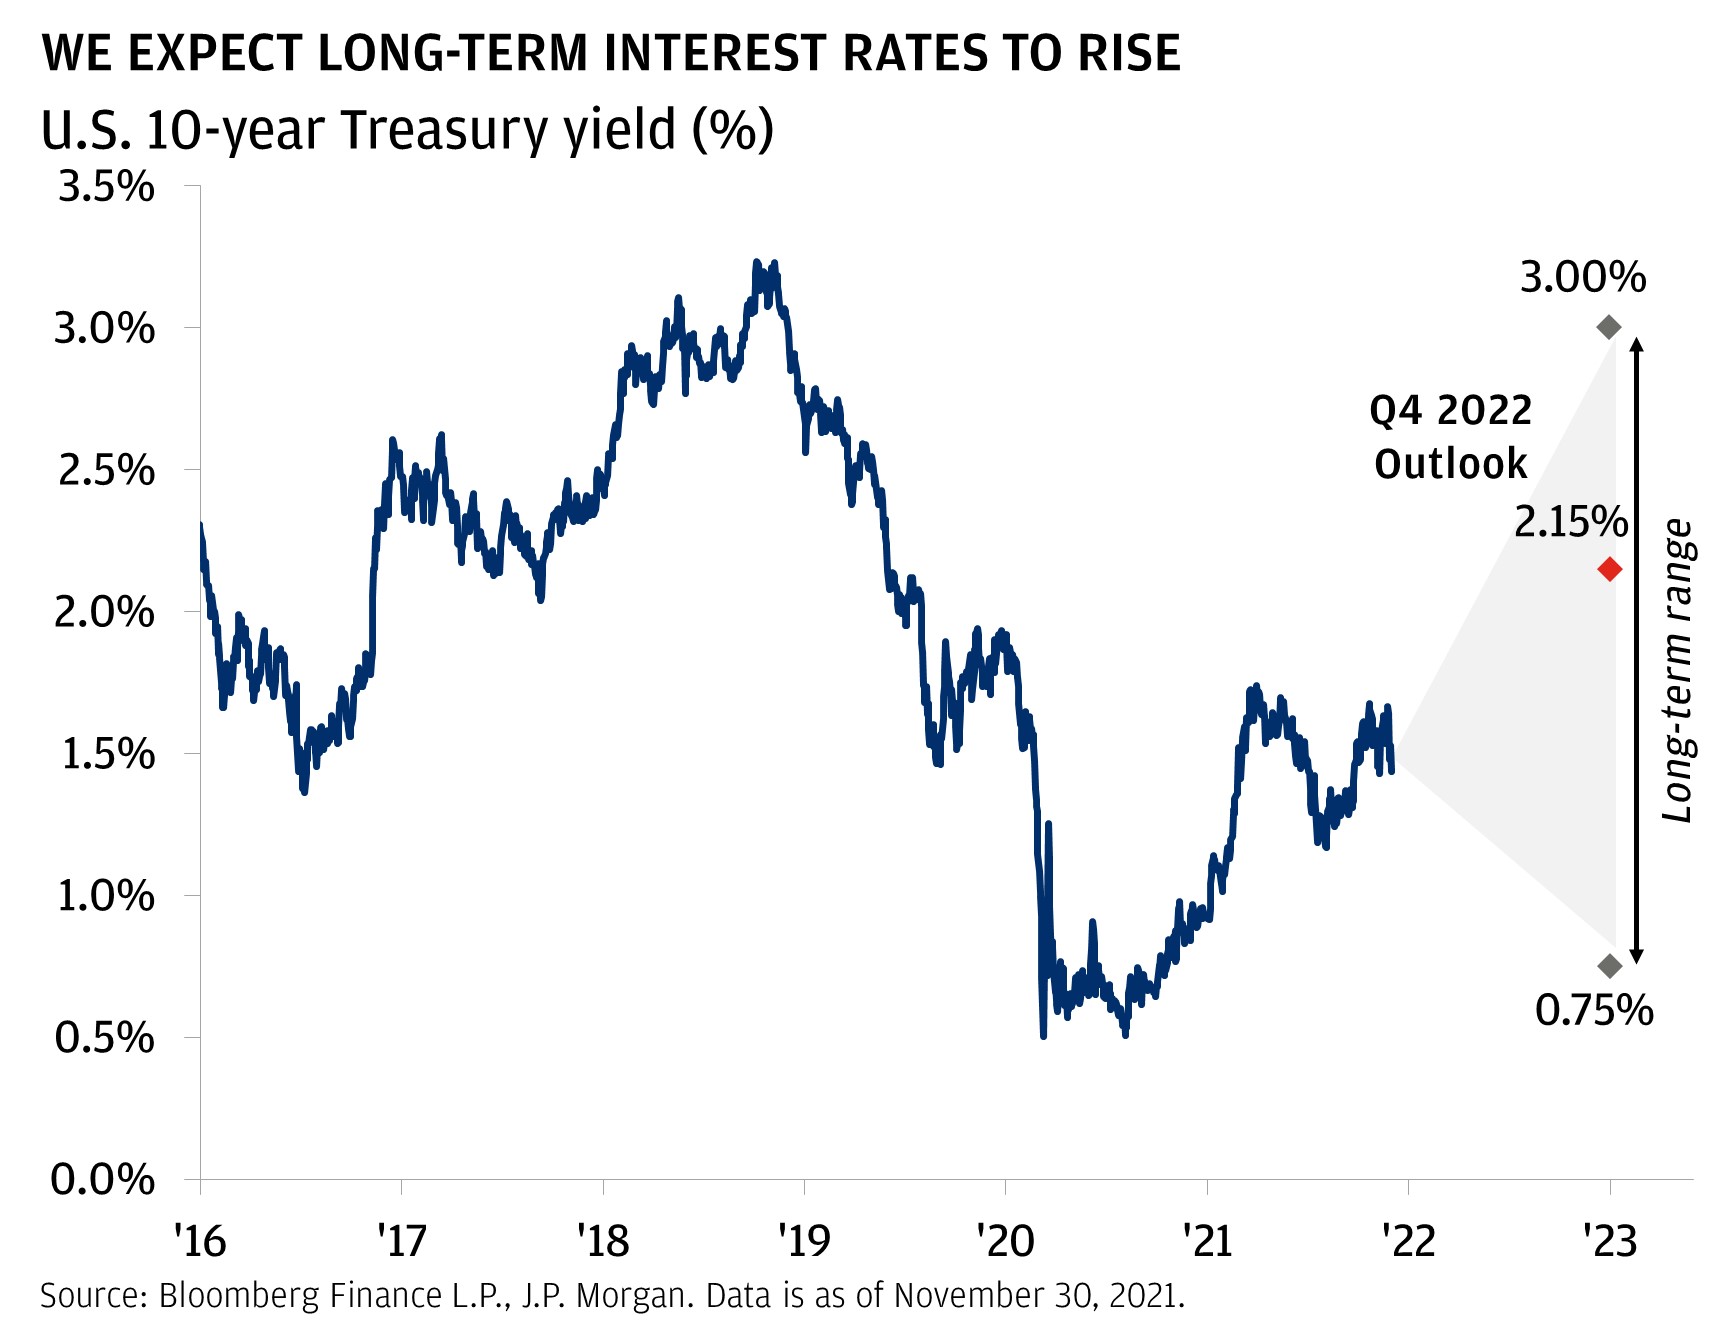 We expect long-term interest rates to rise